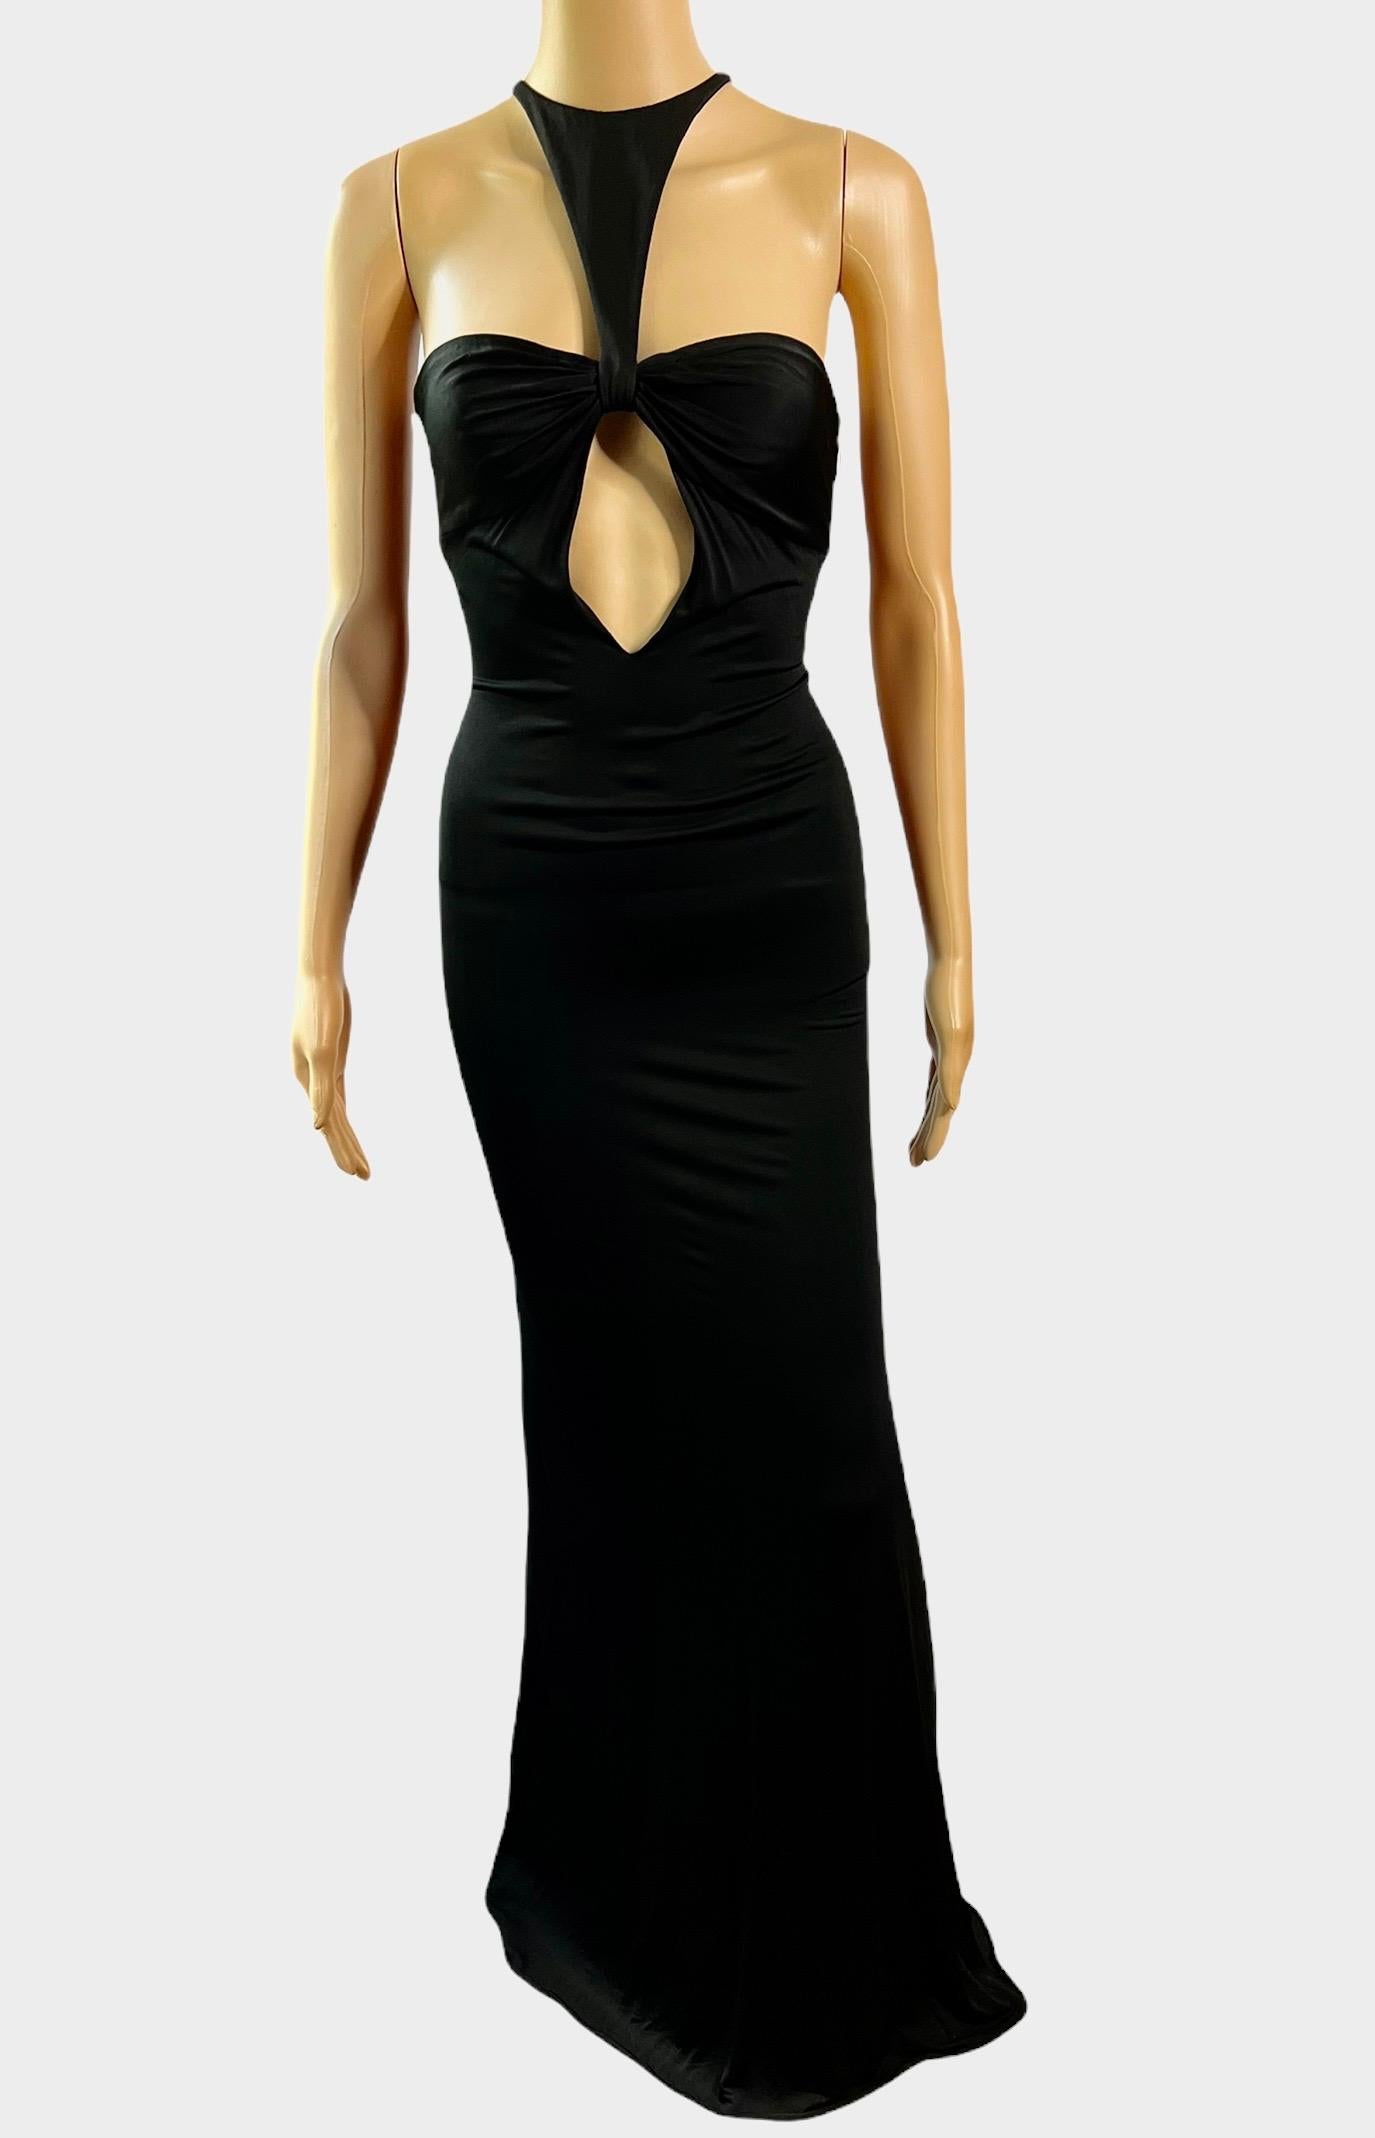 Tom Ford for Gucci F/W 2004 Plunging Cutout Black Evening Dress Gown For Sale 2